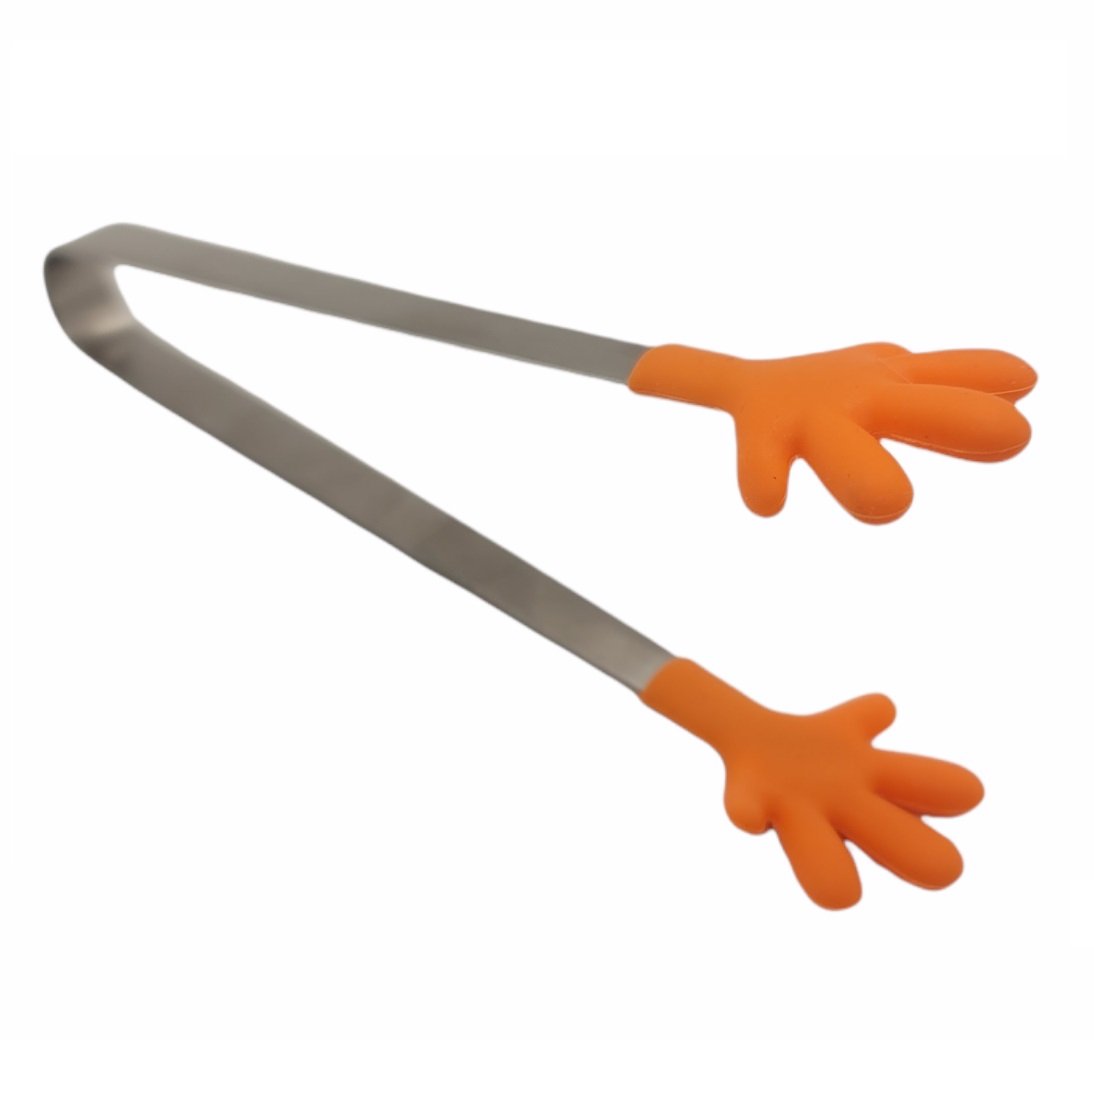 Stainless Steel Cooking Tongs With Silicone Tips - Small Tongs For